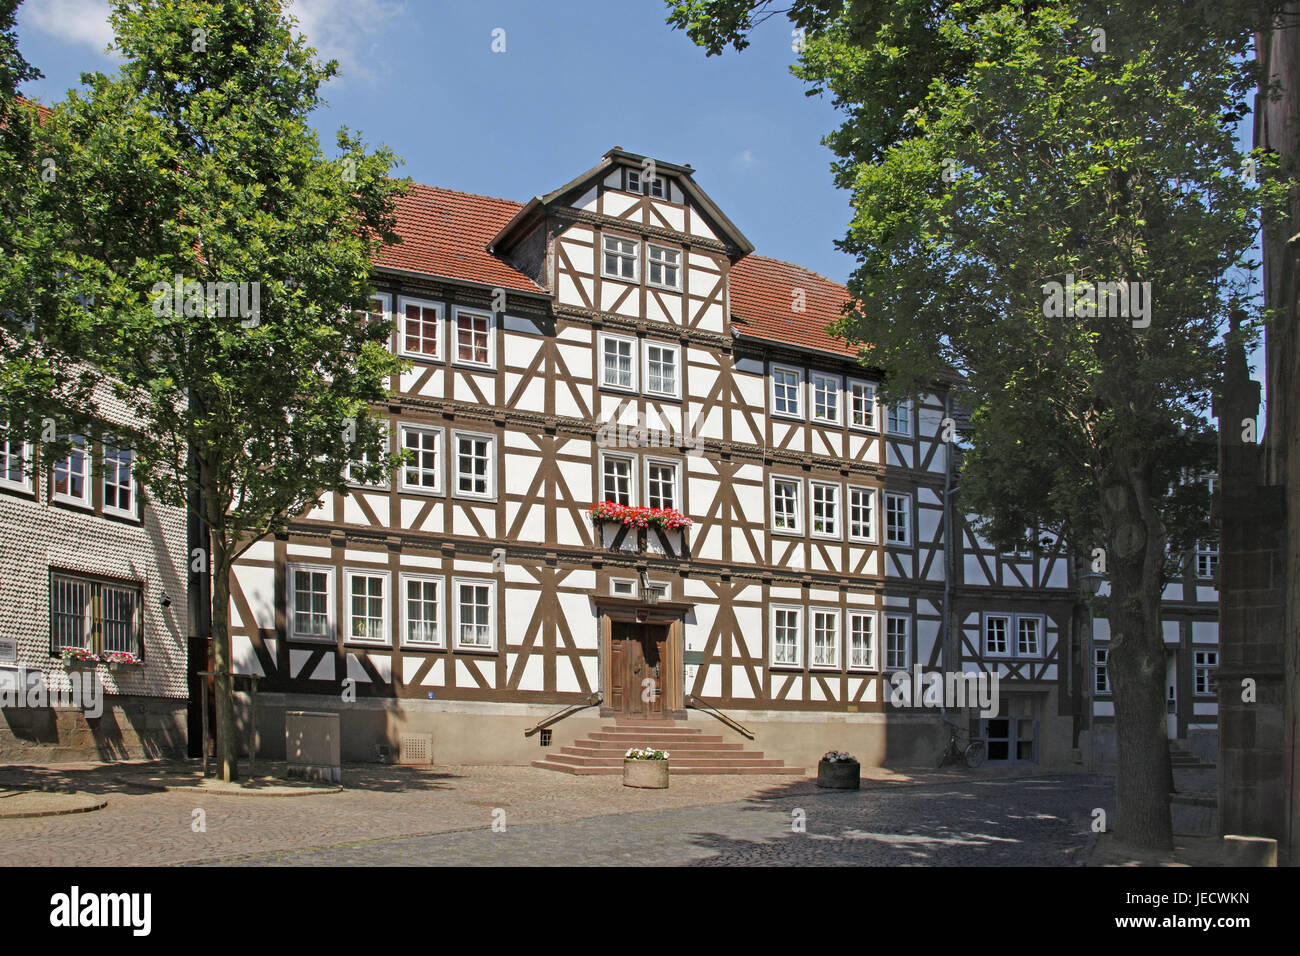 Germany, Hessen, Bad Hersfeld, half-timbered house, Old Town, house, architectural style, half-timbered, outside, facade, nobody, input, Stock Photo